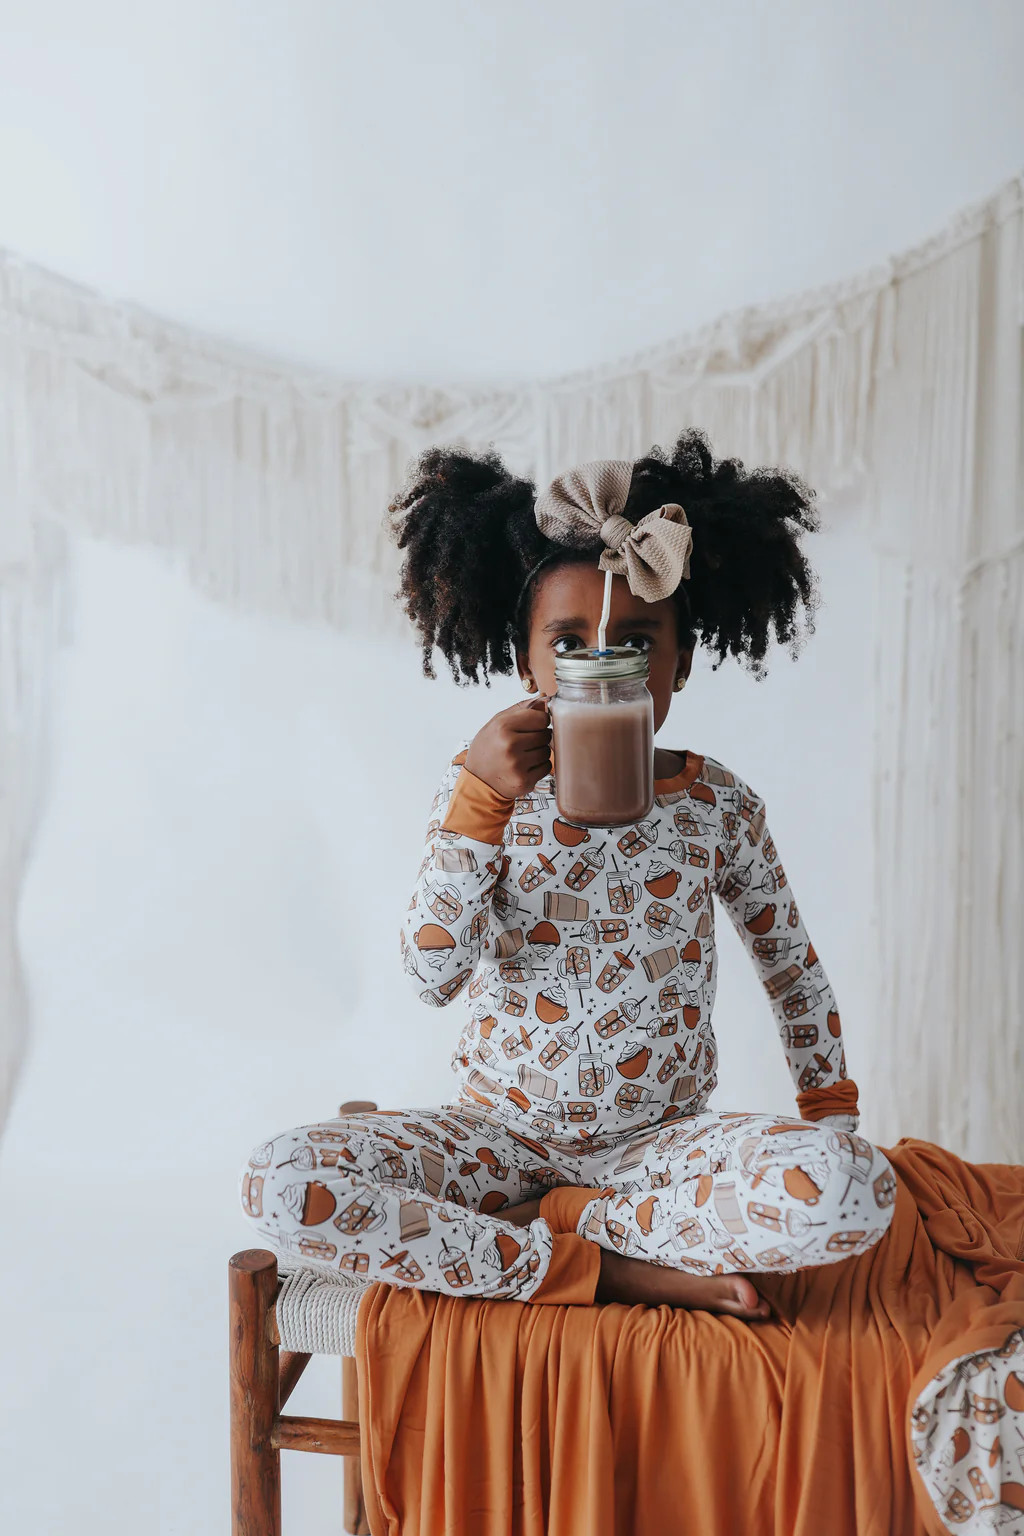 RISE AND GRIND DREAM SET | DREAM BIG LITTLE CO